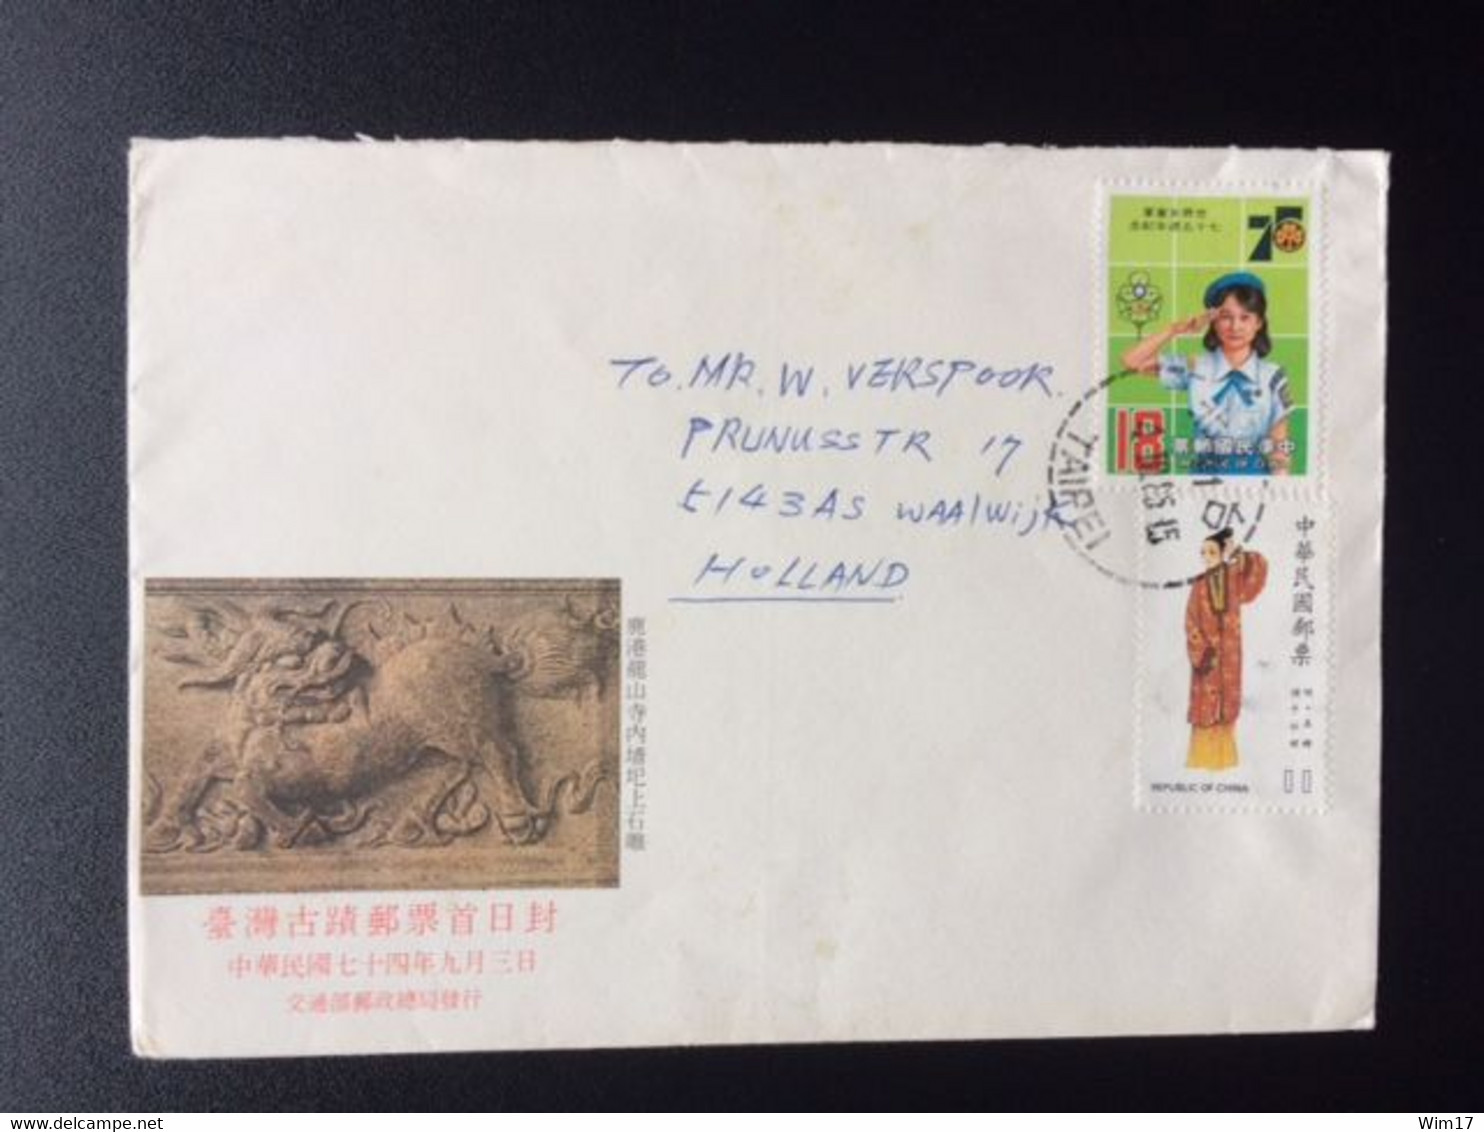 TAIWAN 1985 AIR MAIL LETTER SCOUTING - Entiers Postaux